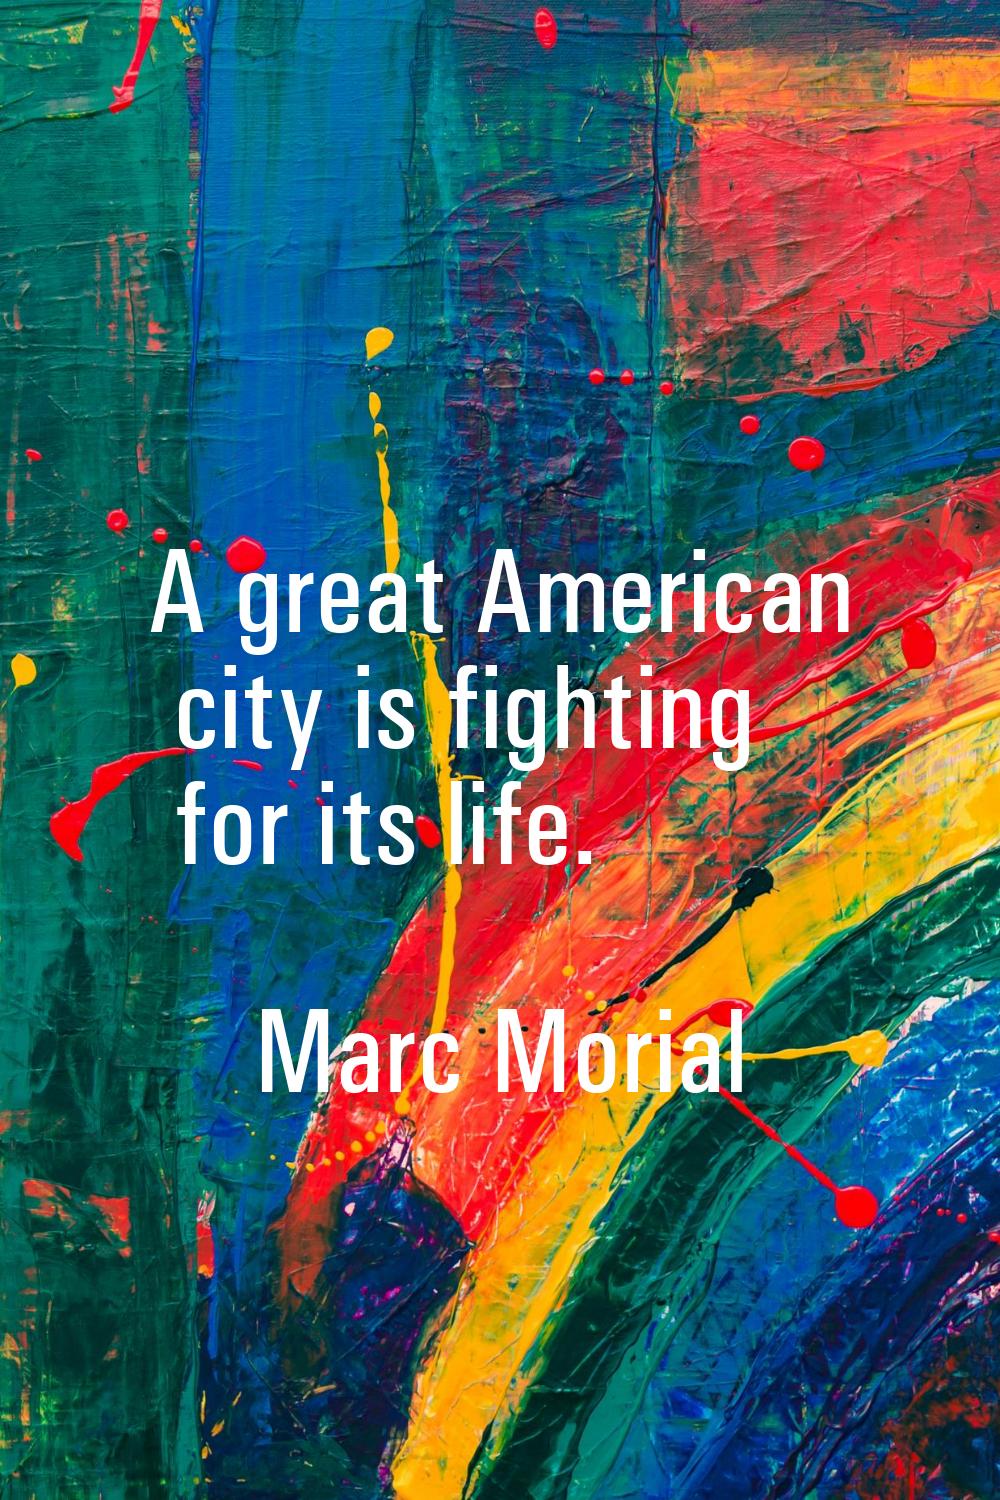 A great American city is fighting for its life.